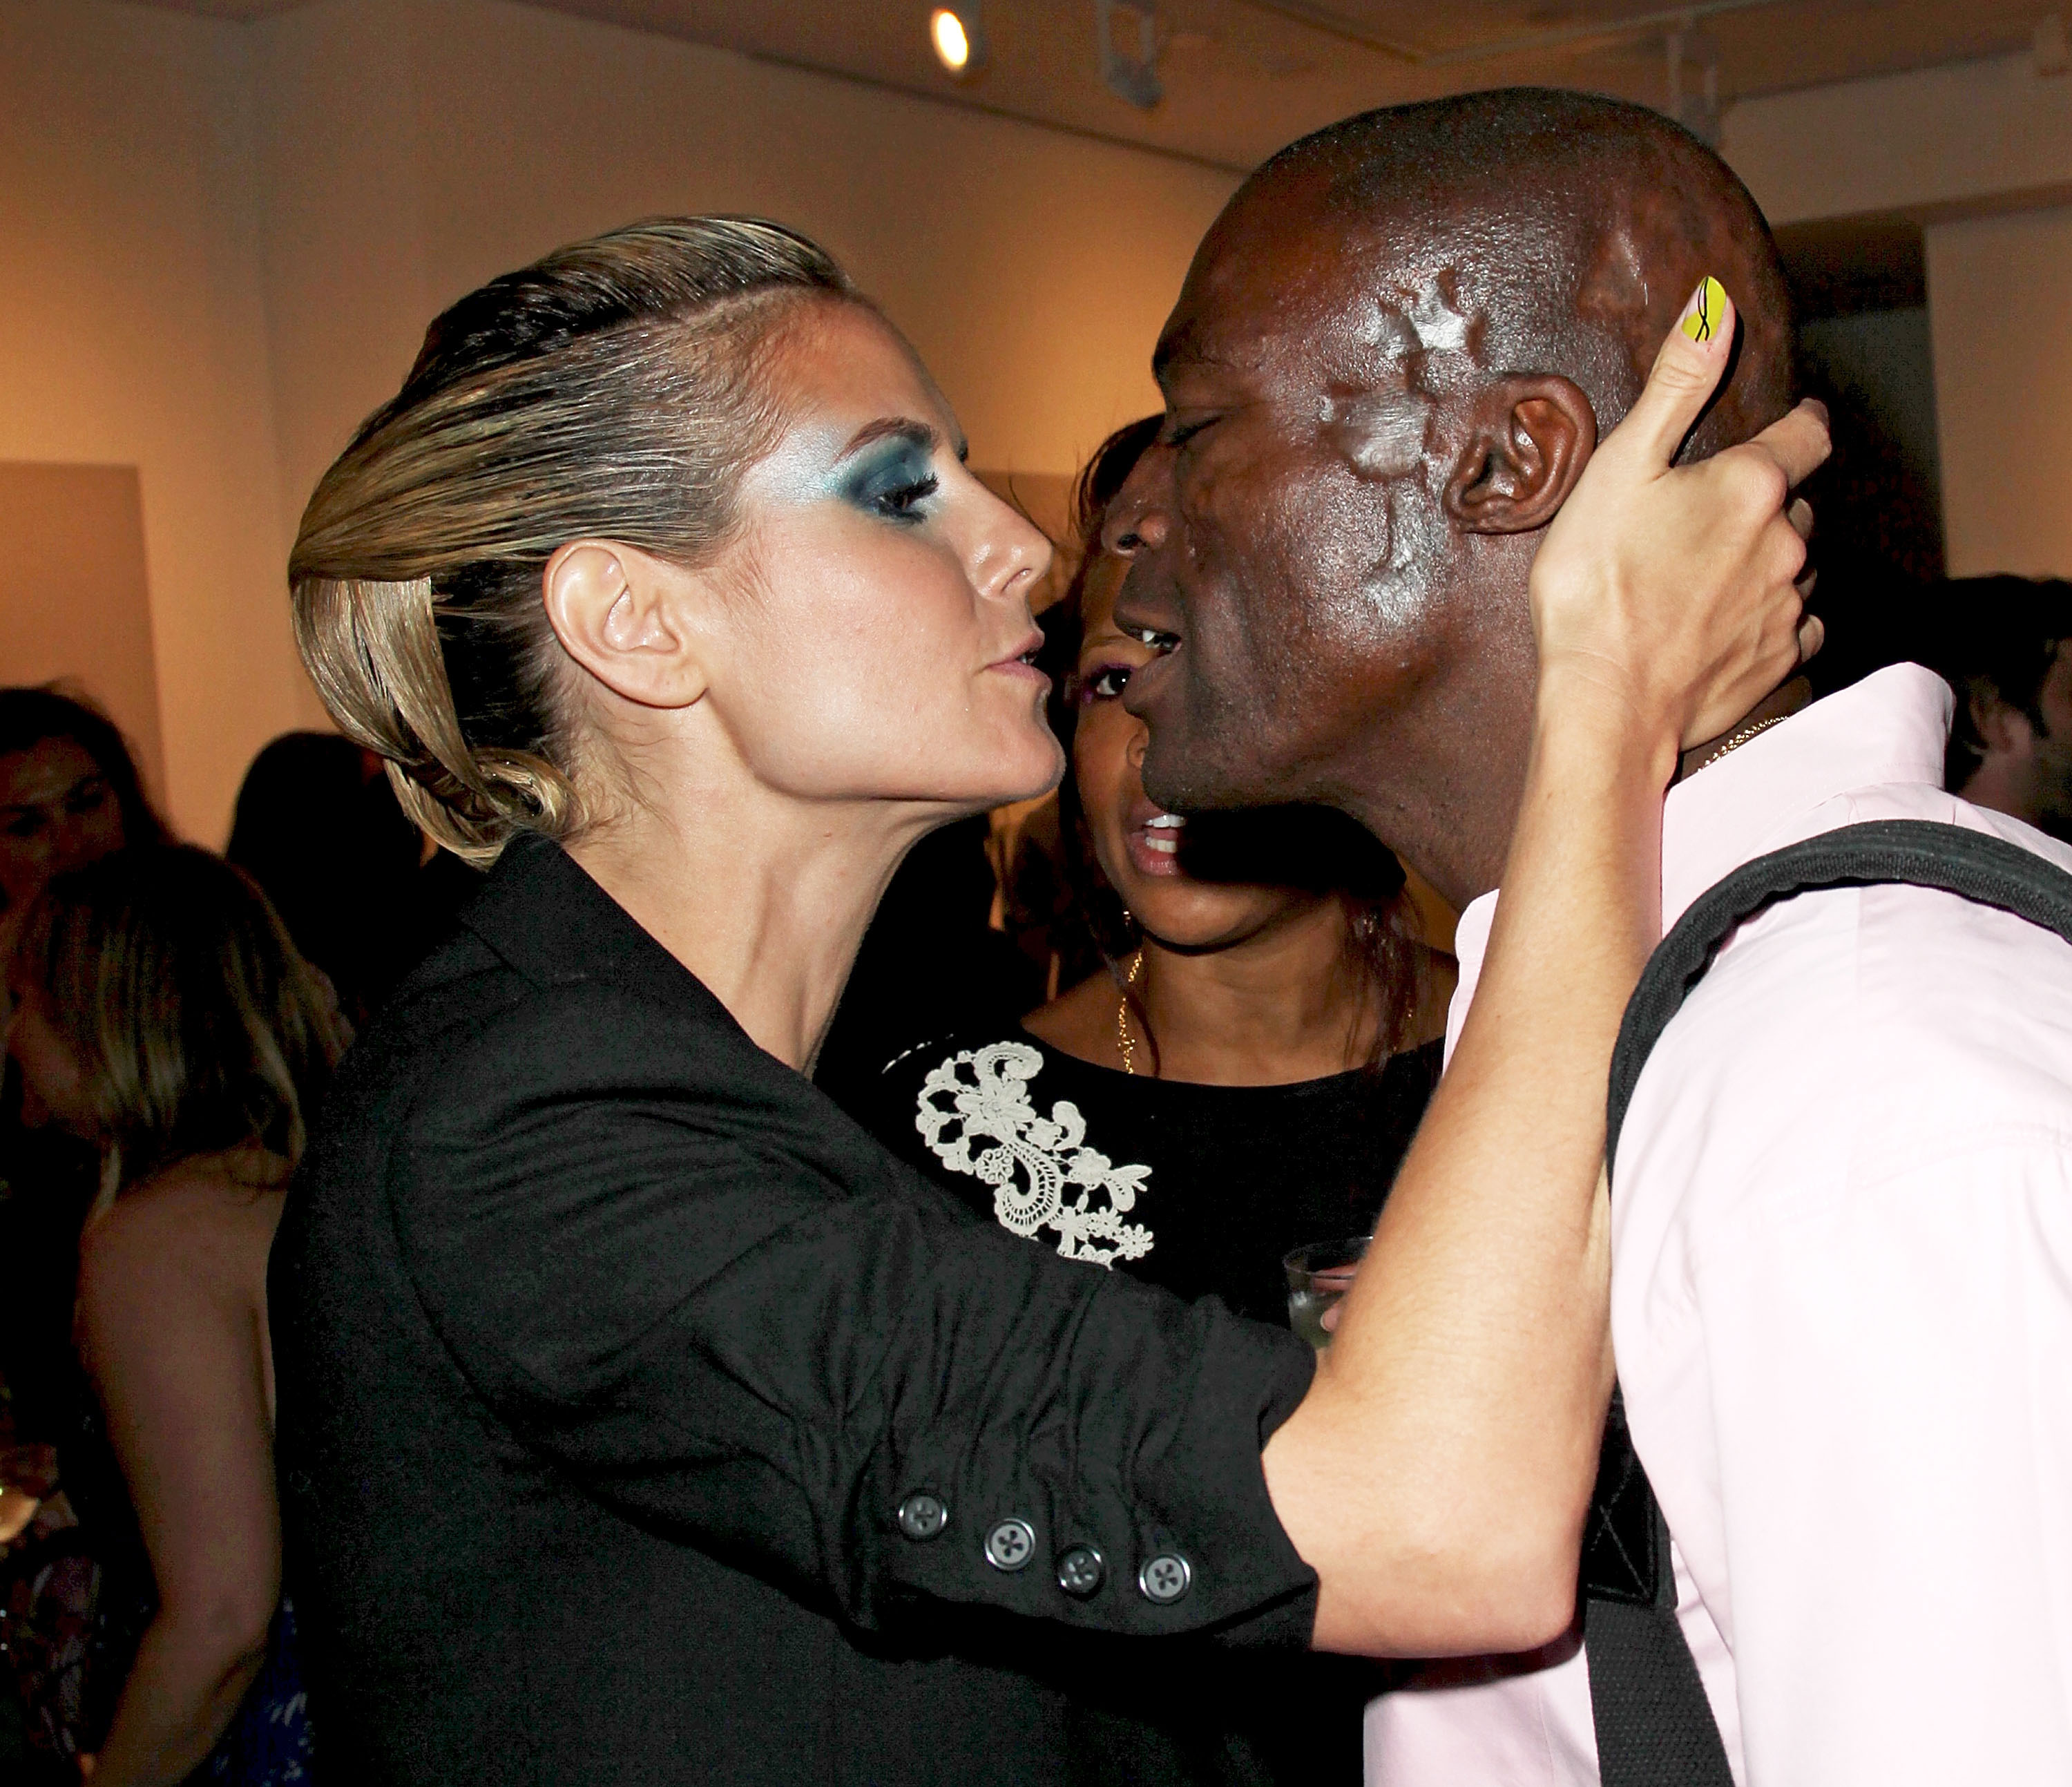 Heidi Klum and Seal attend "Rankin's Rubbish" photographic exhibition opening night reception in Los Angeles, California, on May 3, 2011. | Source: Getty Images